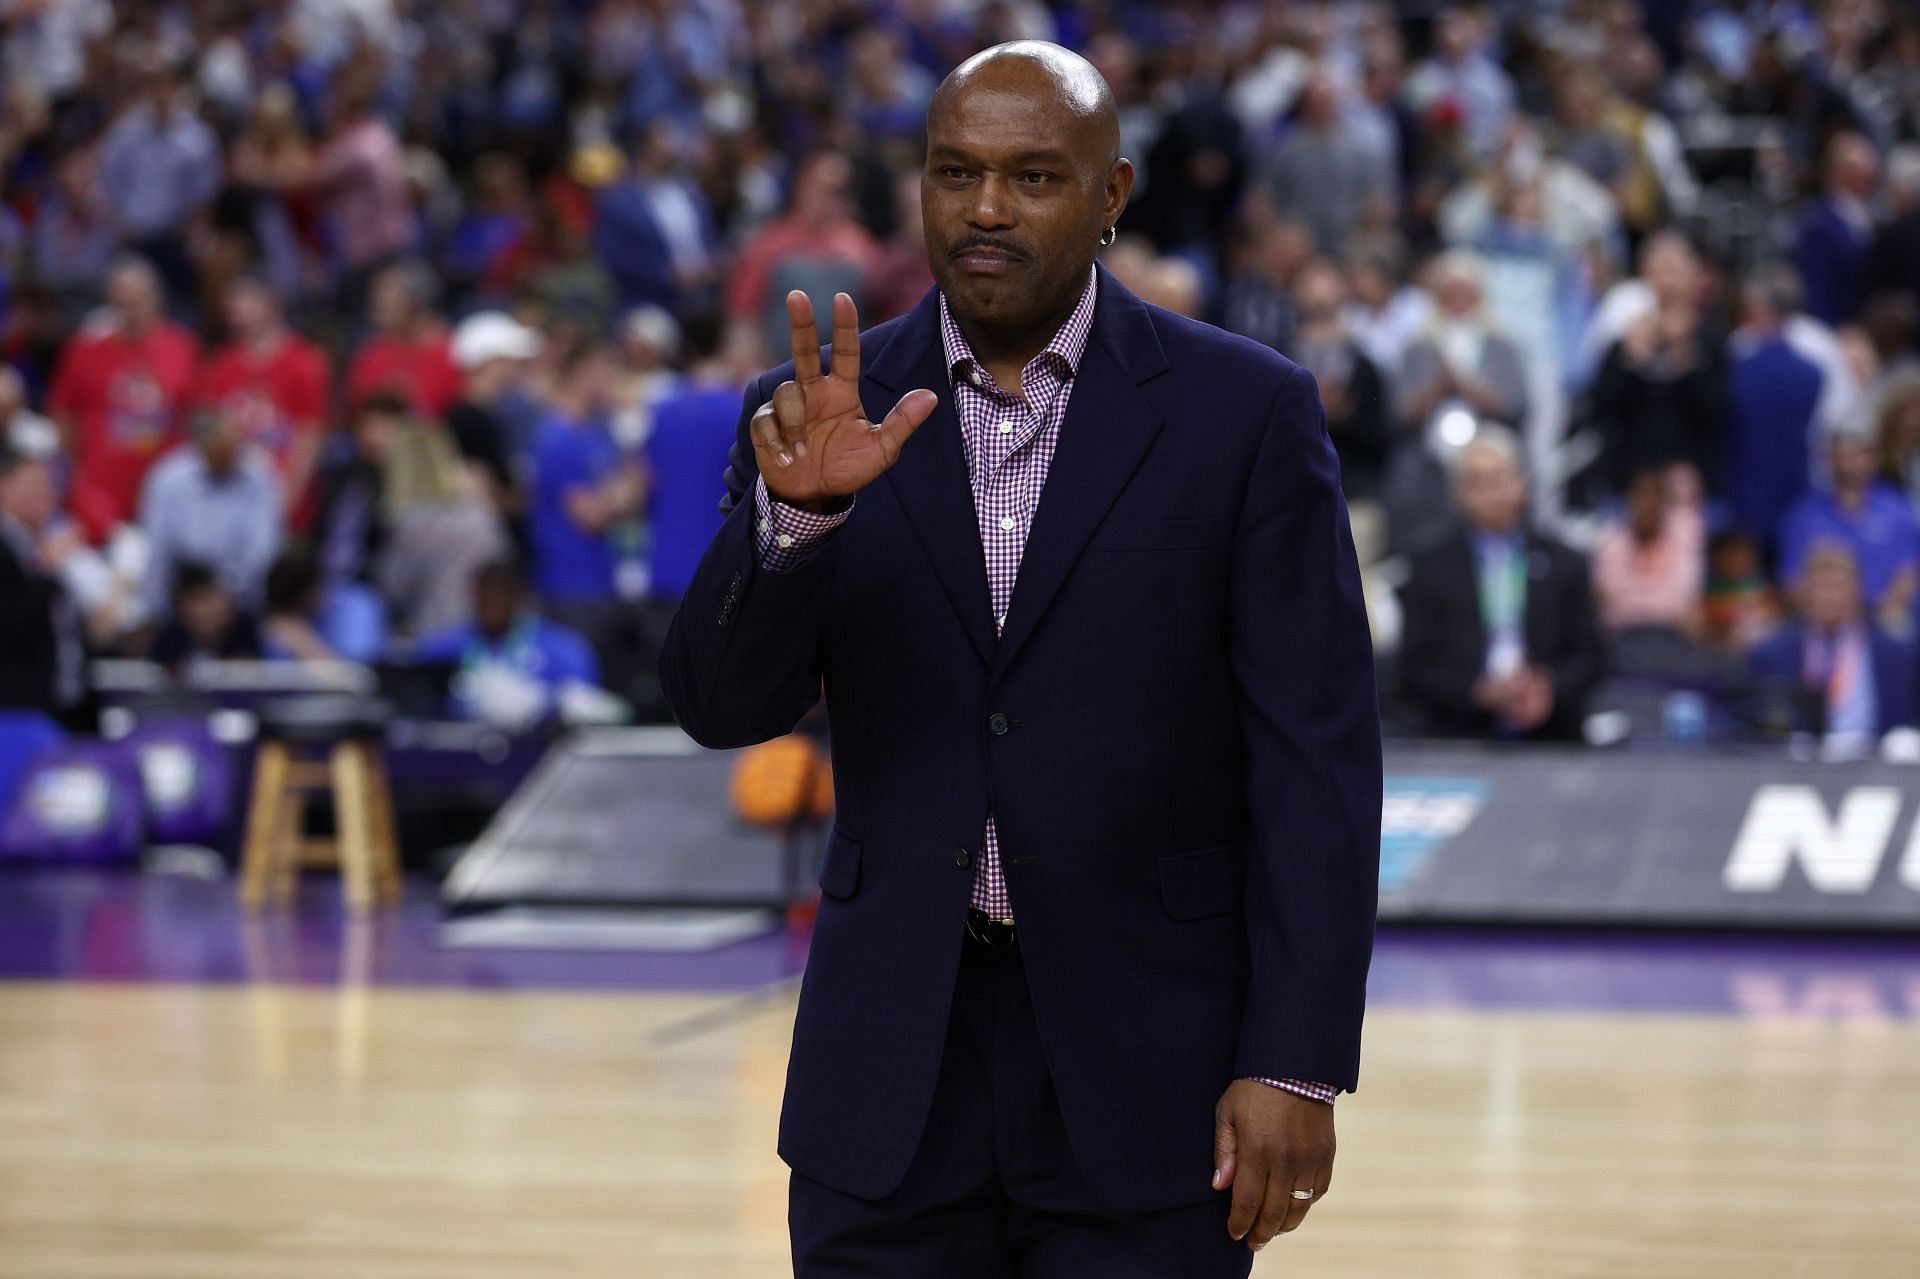 Tim Hardaway is part of the Hall of Fame Class of 2022